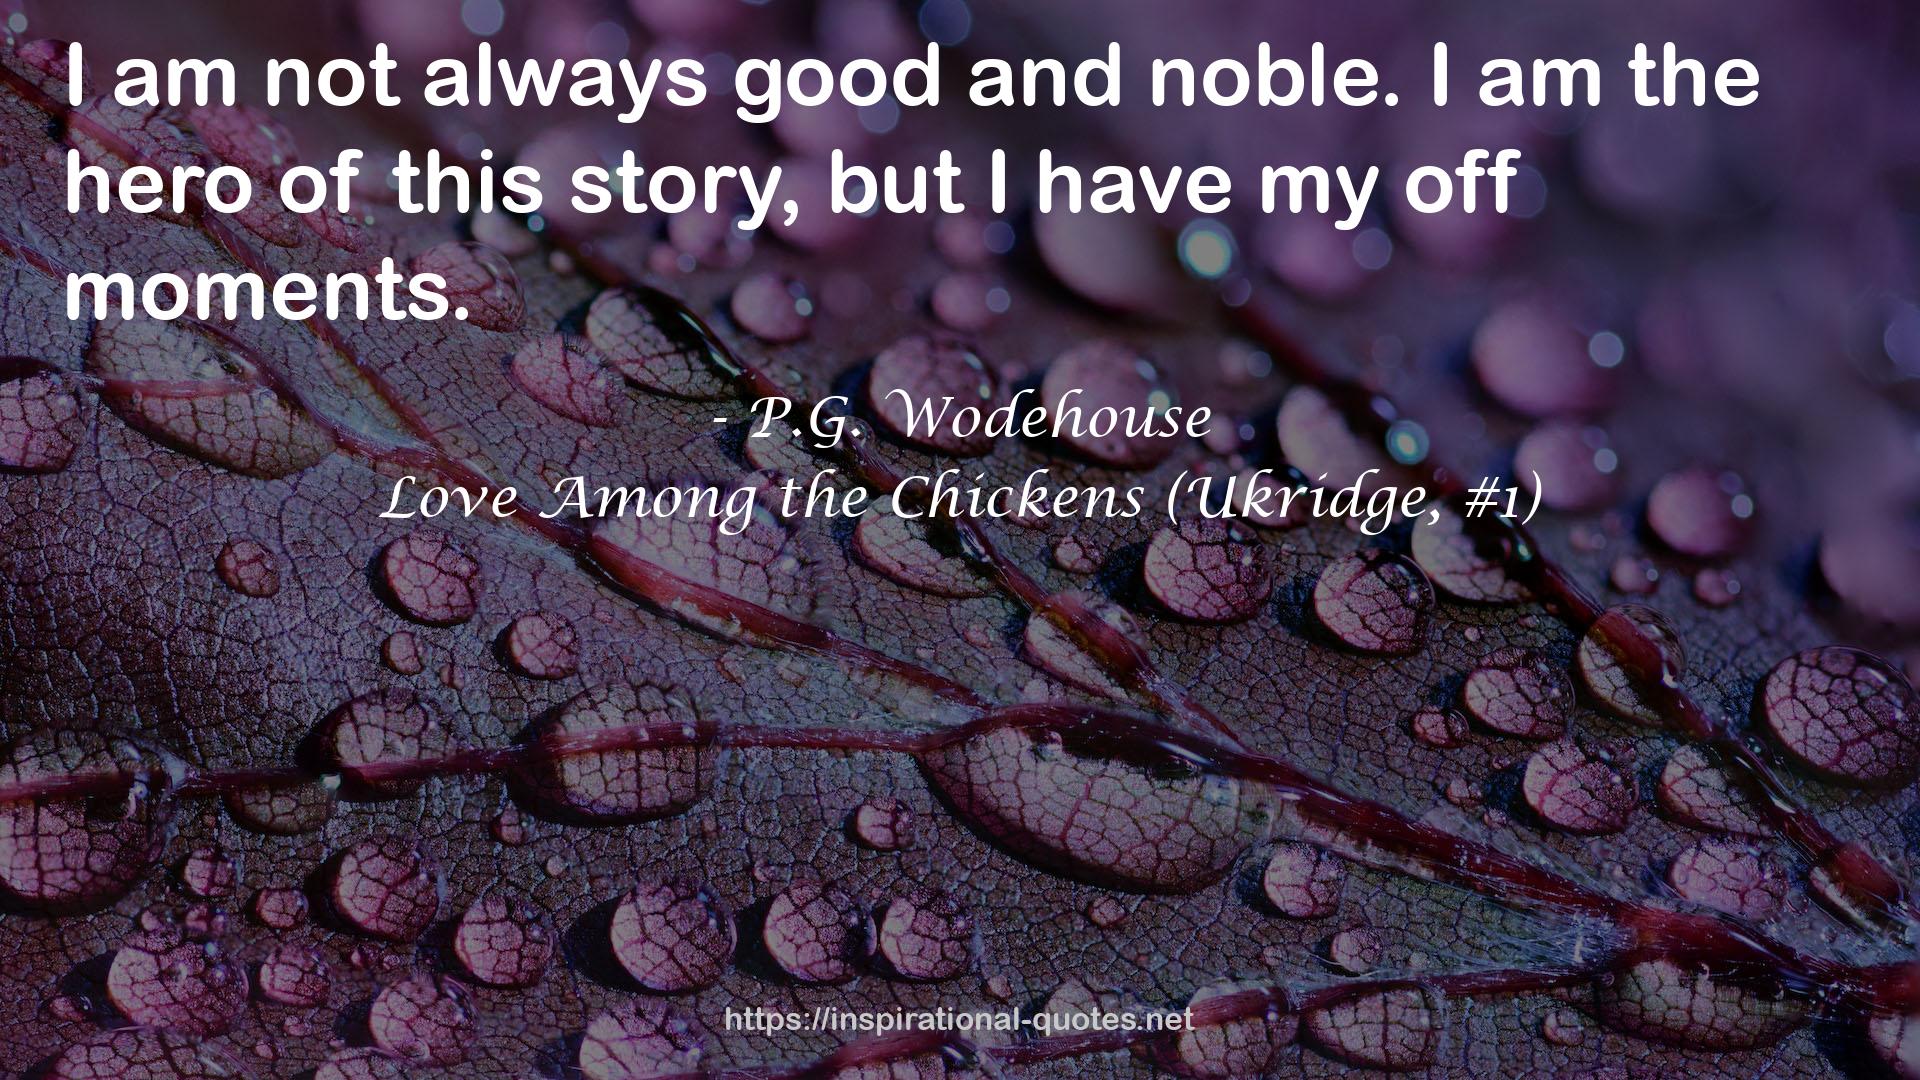 Love Among the Chickens (Ukridge, #1) QUOTES